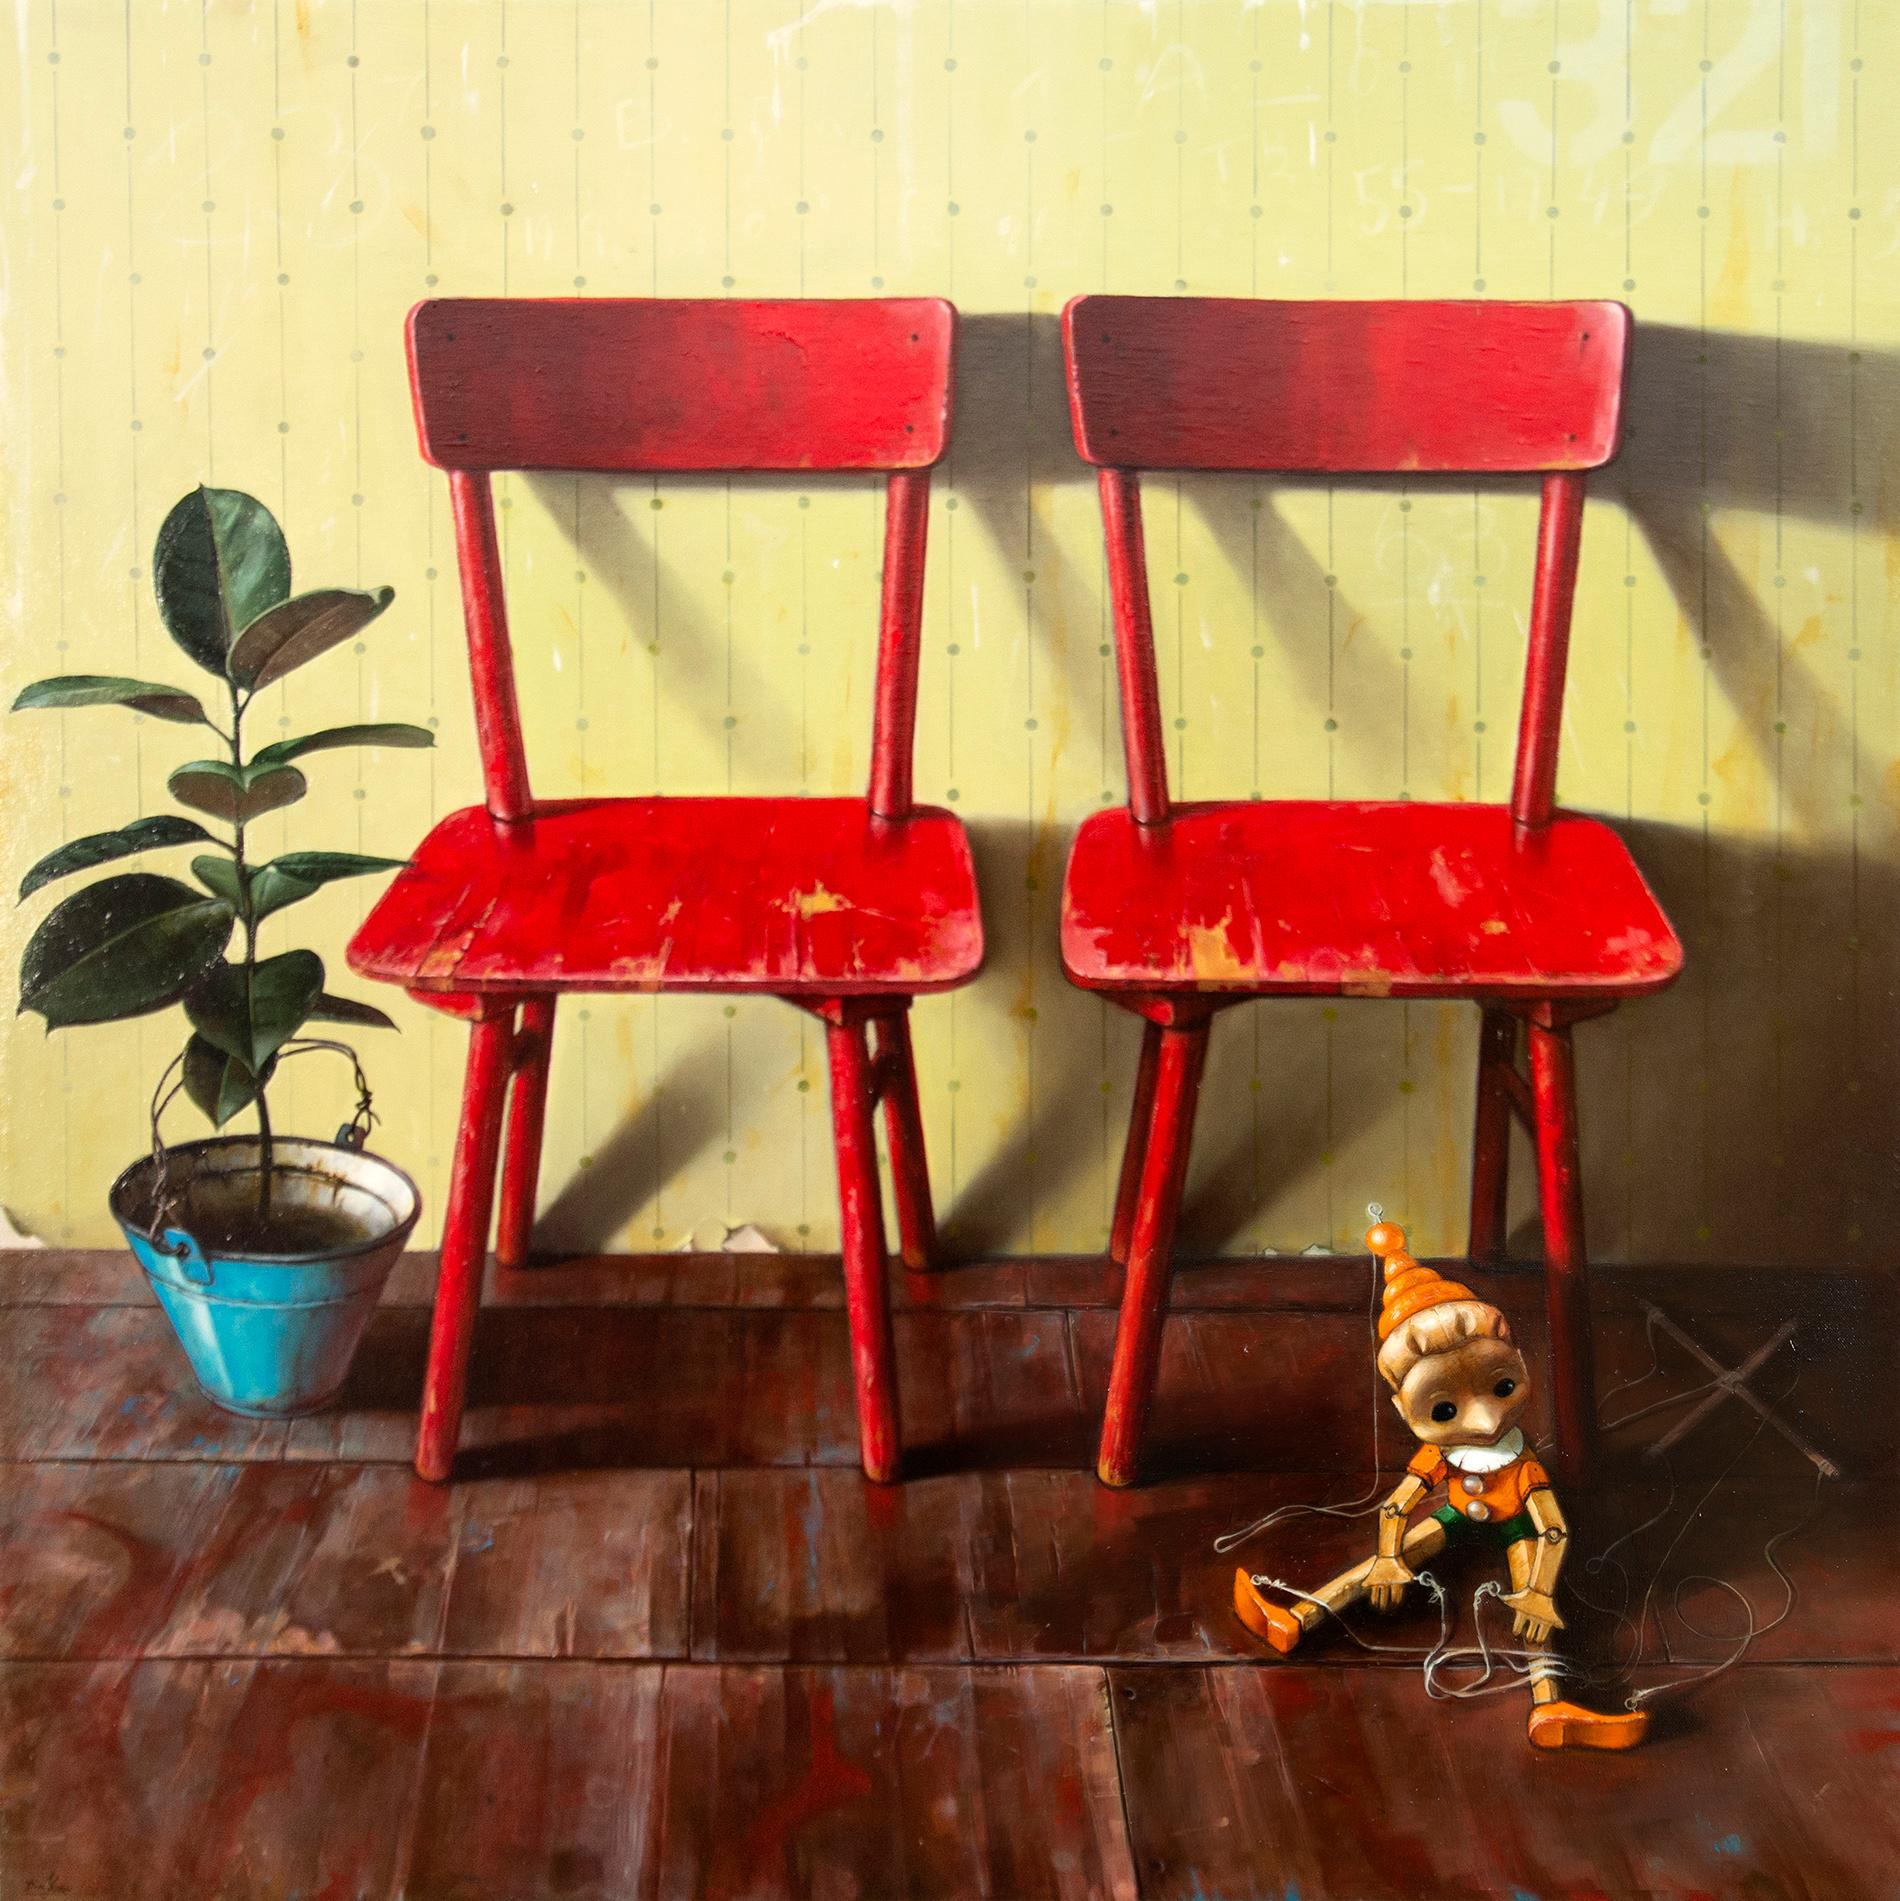 Dmitry Yuzefovich Still-Life Painting - Two Red Chairs and Pinocchio - realist, interior, Ukrainian, Israeli, oil/canvas